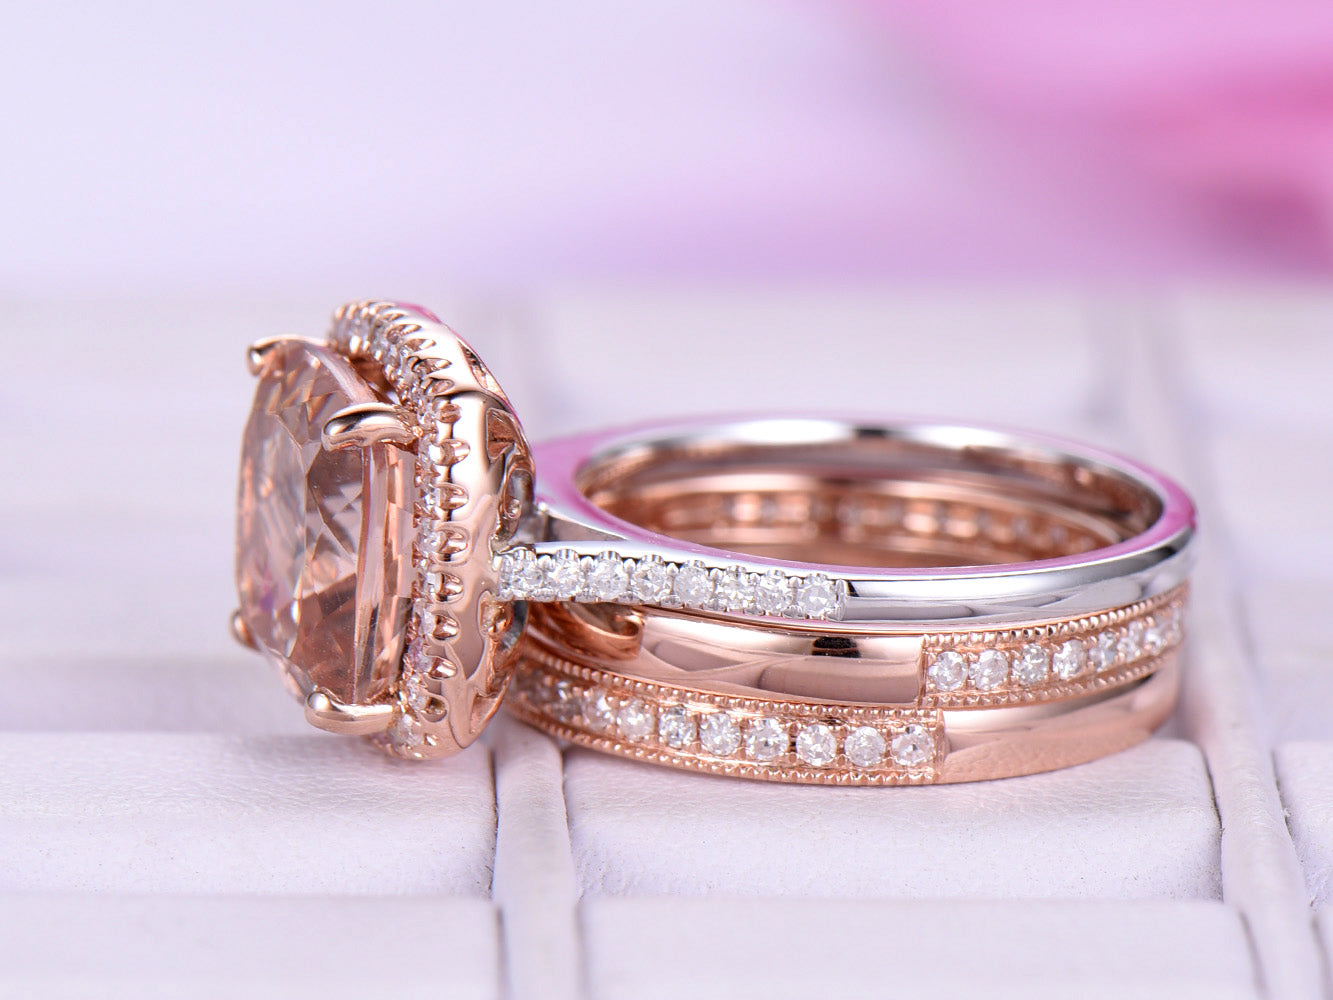 Reserved for Emily Cushion Morganite Engagement Cathedral Ring Trio Sets 14K White/Rose Gold 9mm